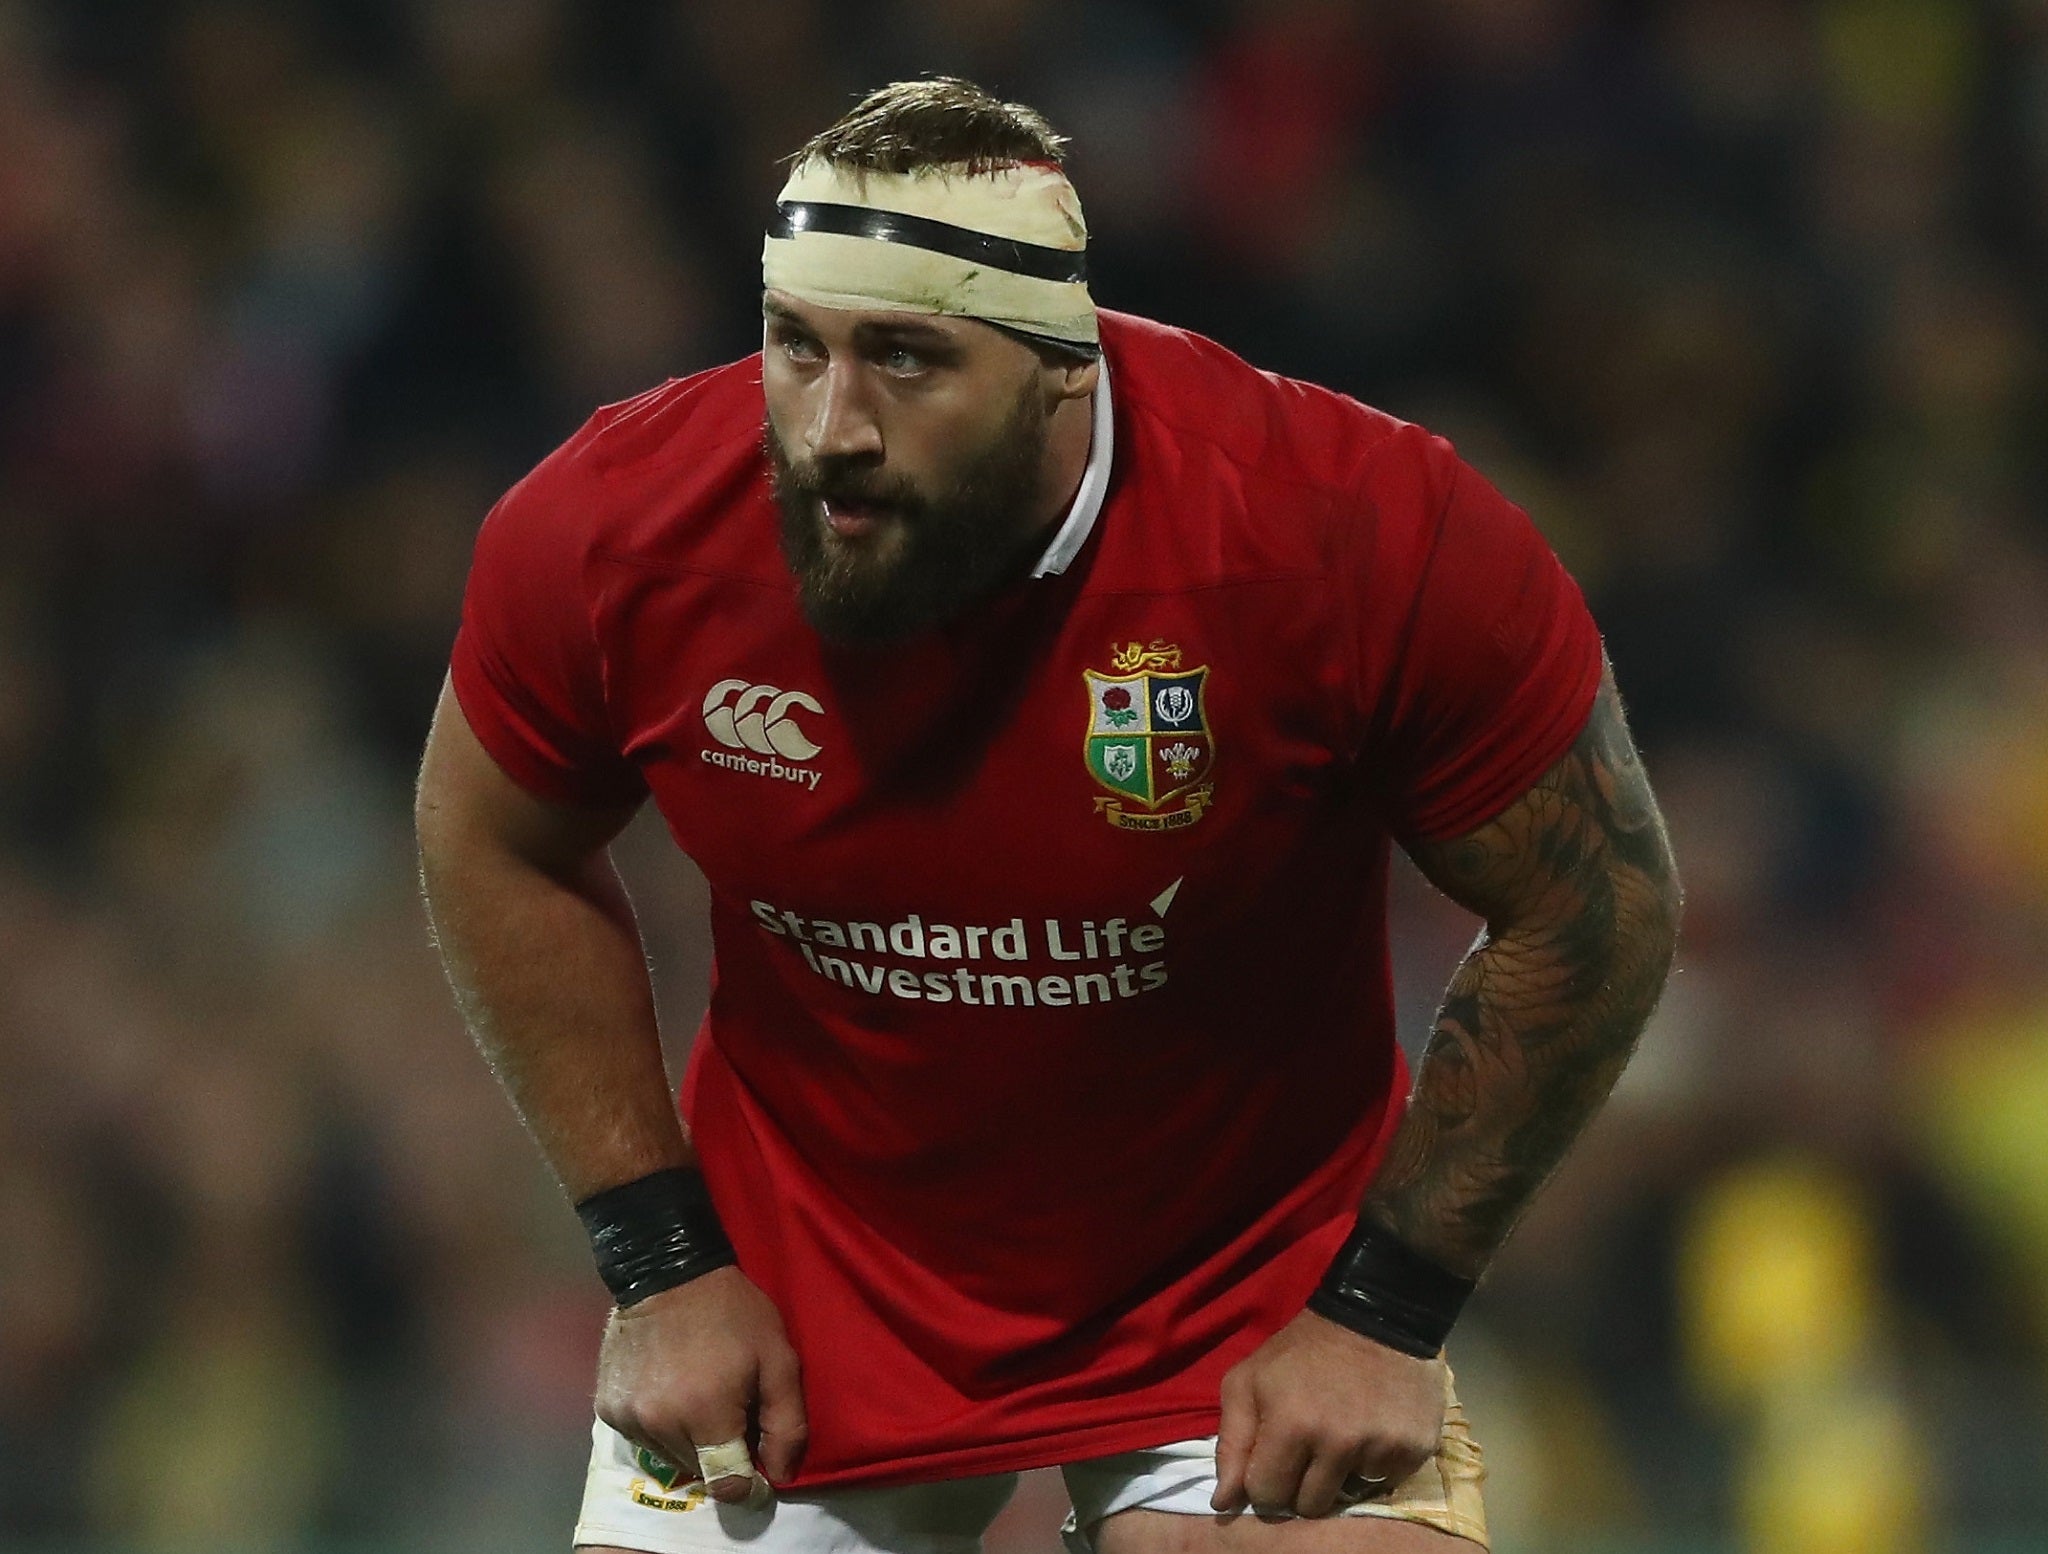 Joe Marler suffered a head injury in the win over the Chiefs but didn't leave the field for an HIA